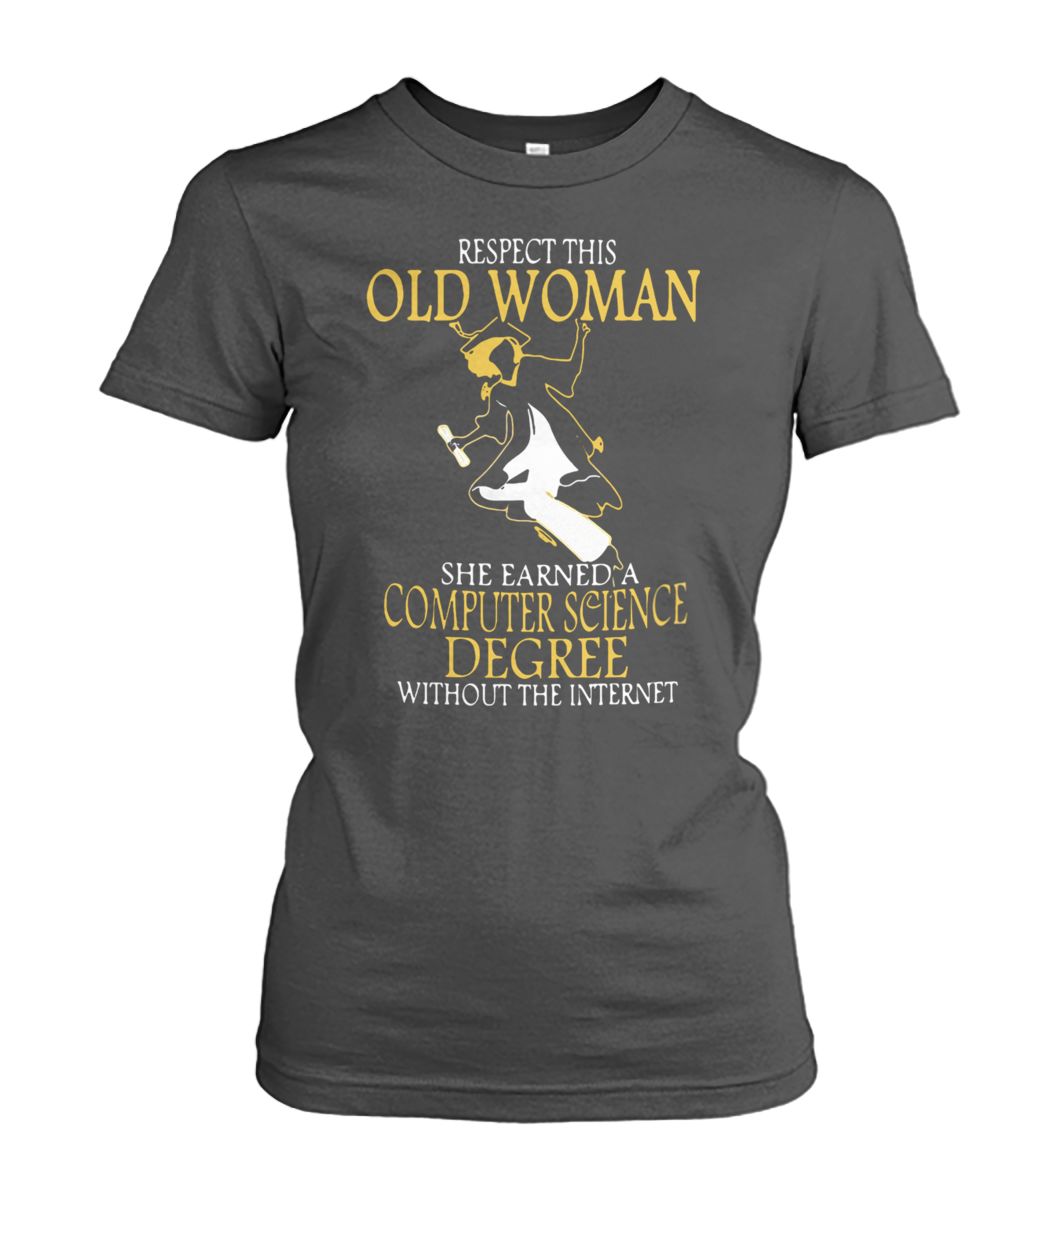 Respect this old woman she earned a computer science degree without the internet women's crew tee